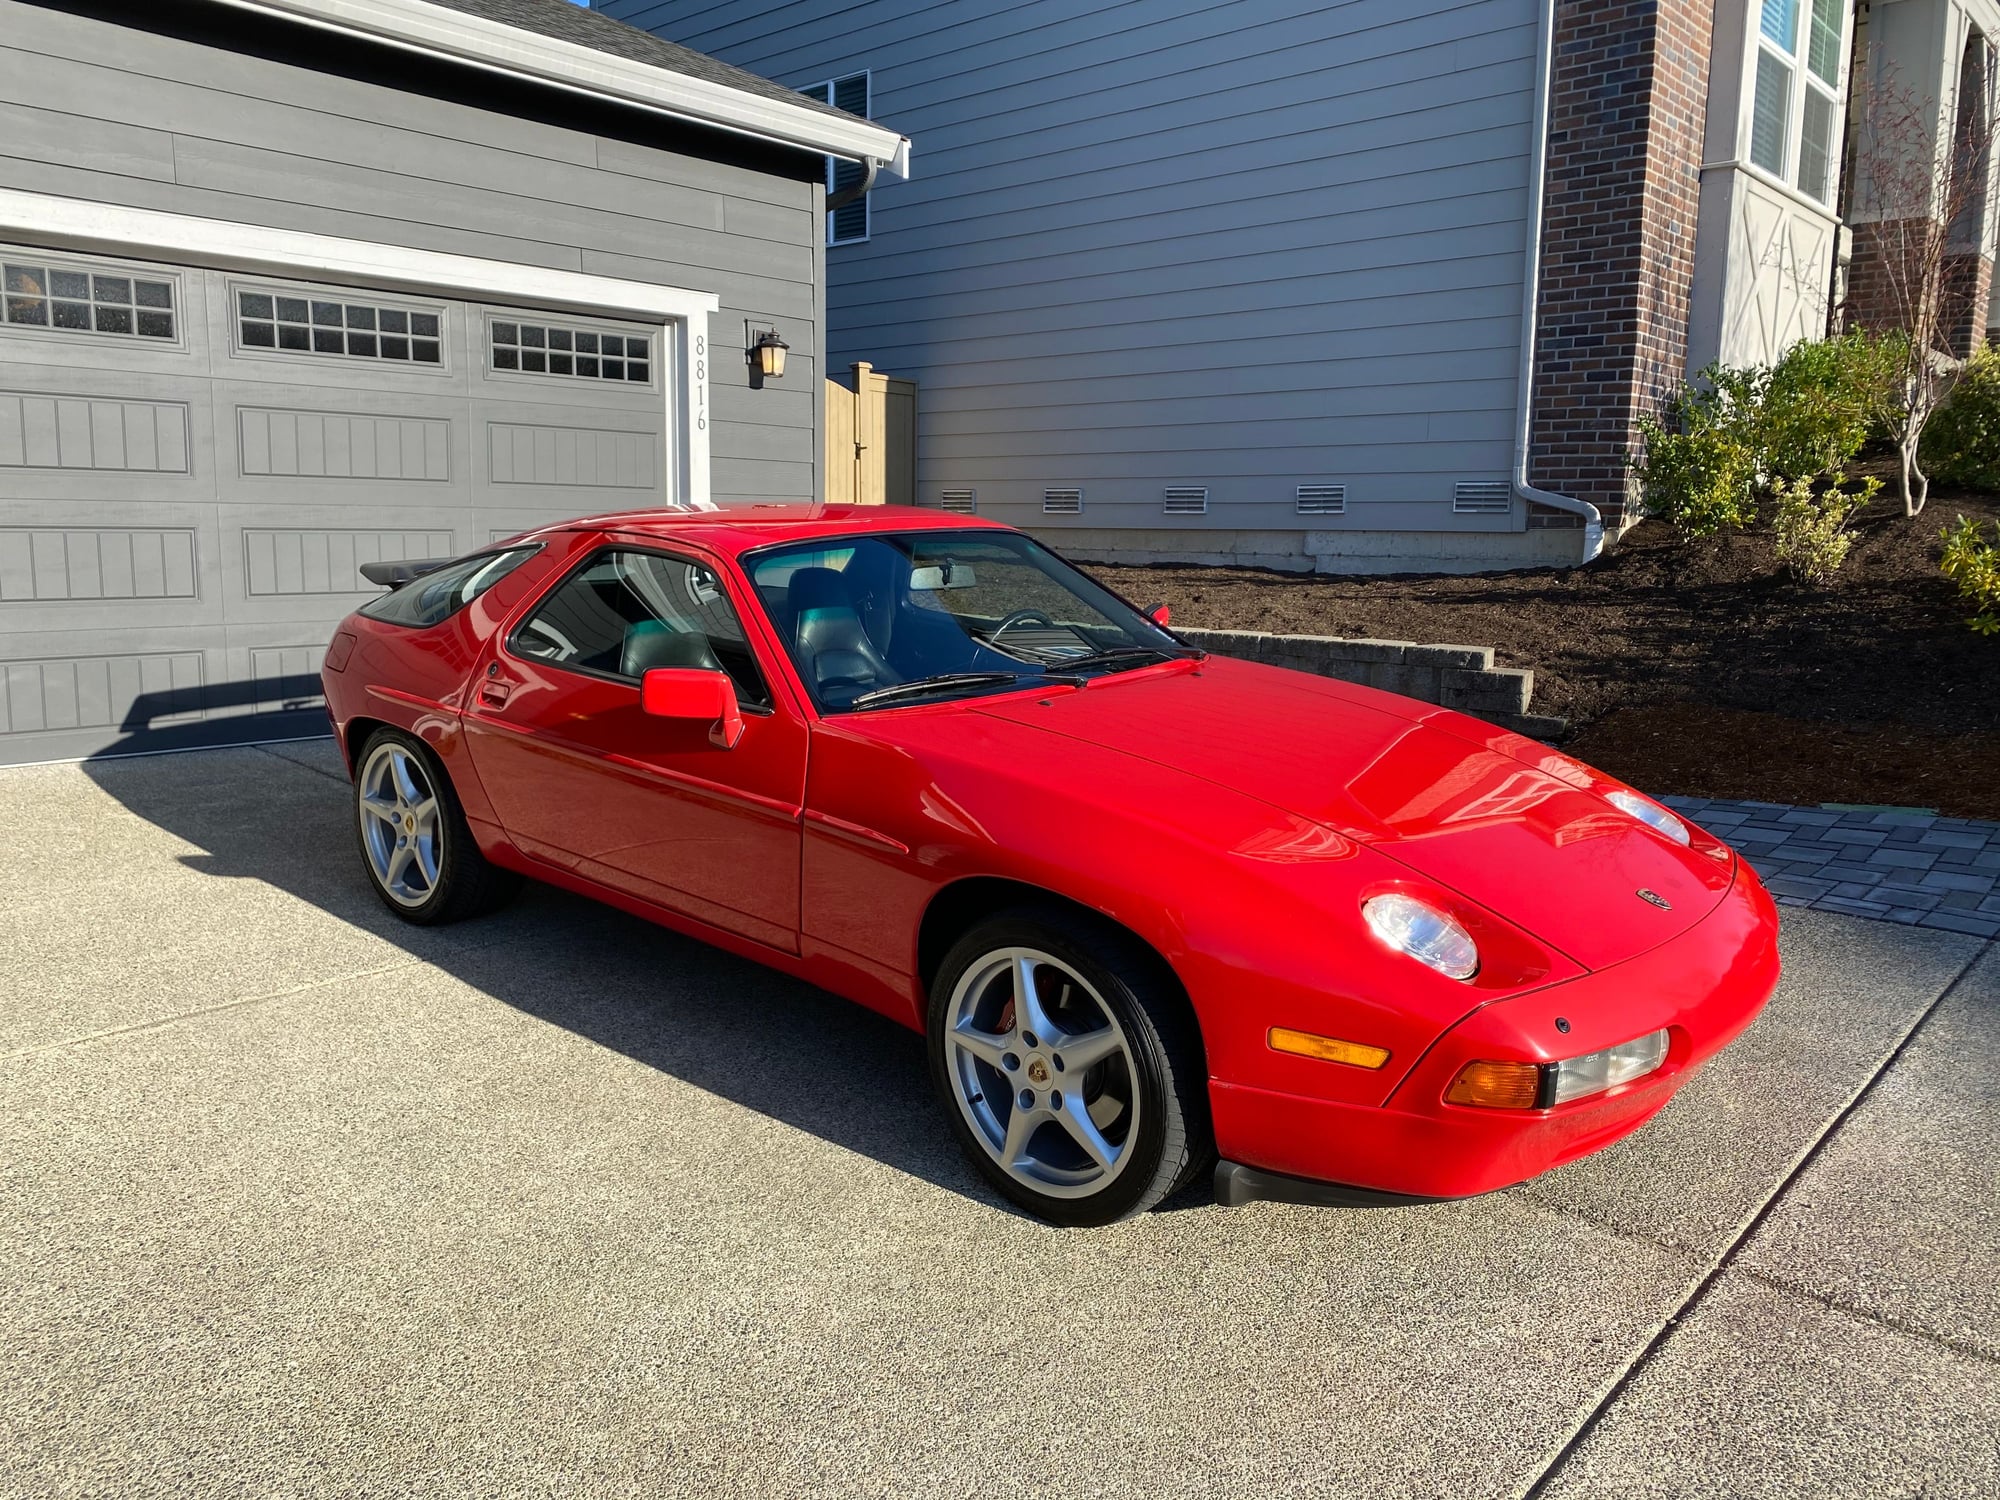 1988 Porsche 928 - 1988 Porsche 928 S4 5 Speed - Used - VIN WPOJBO928JS860978 - 8 cyl - 2WD - Manual - Coupe - Red - Snoqualmie, WA 98065, United States